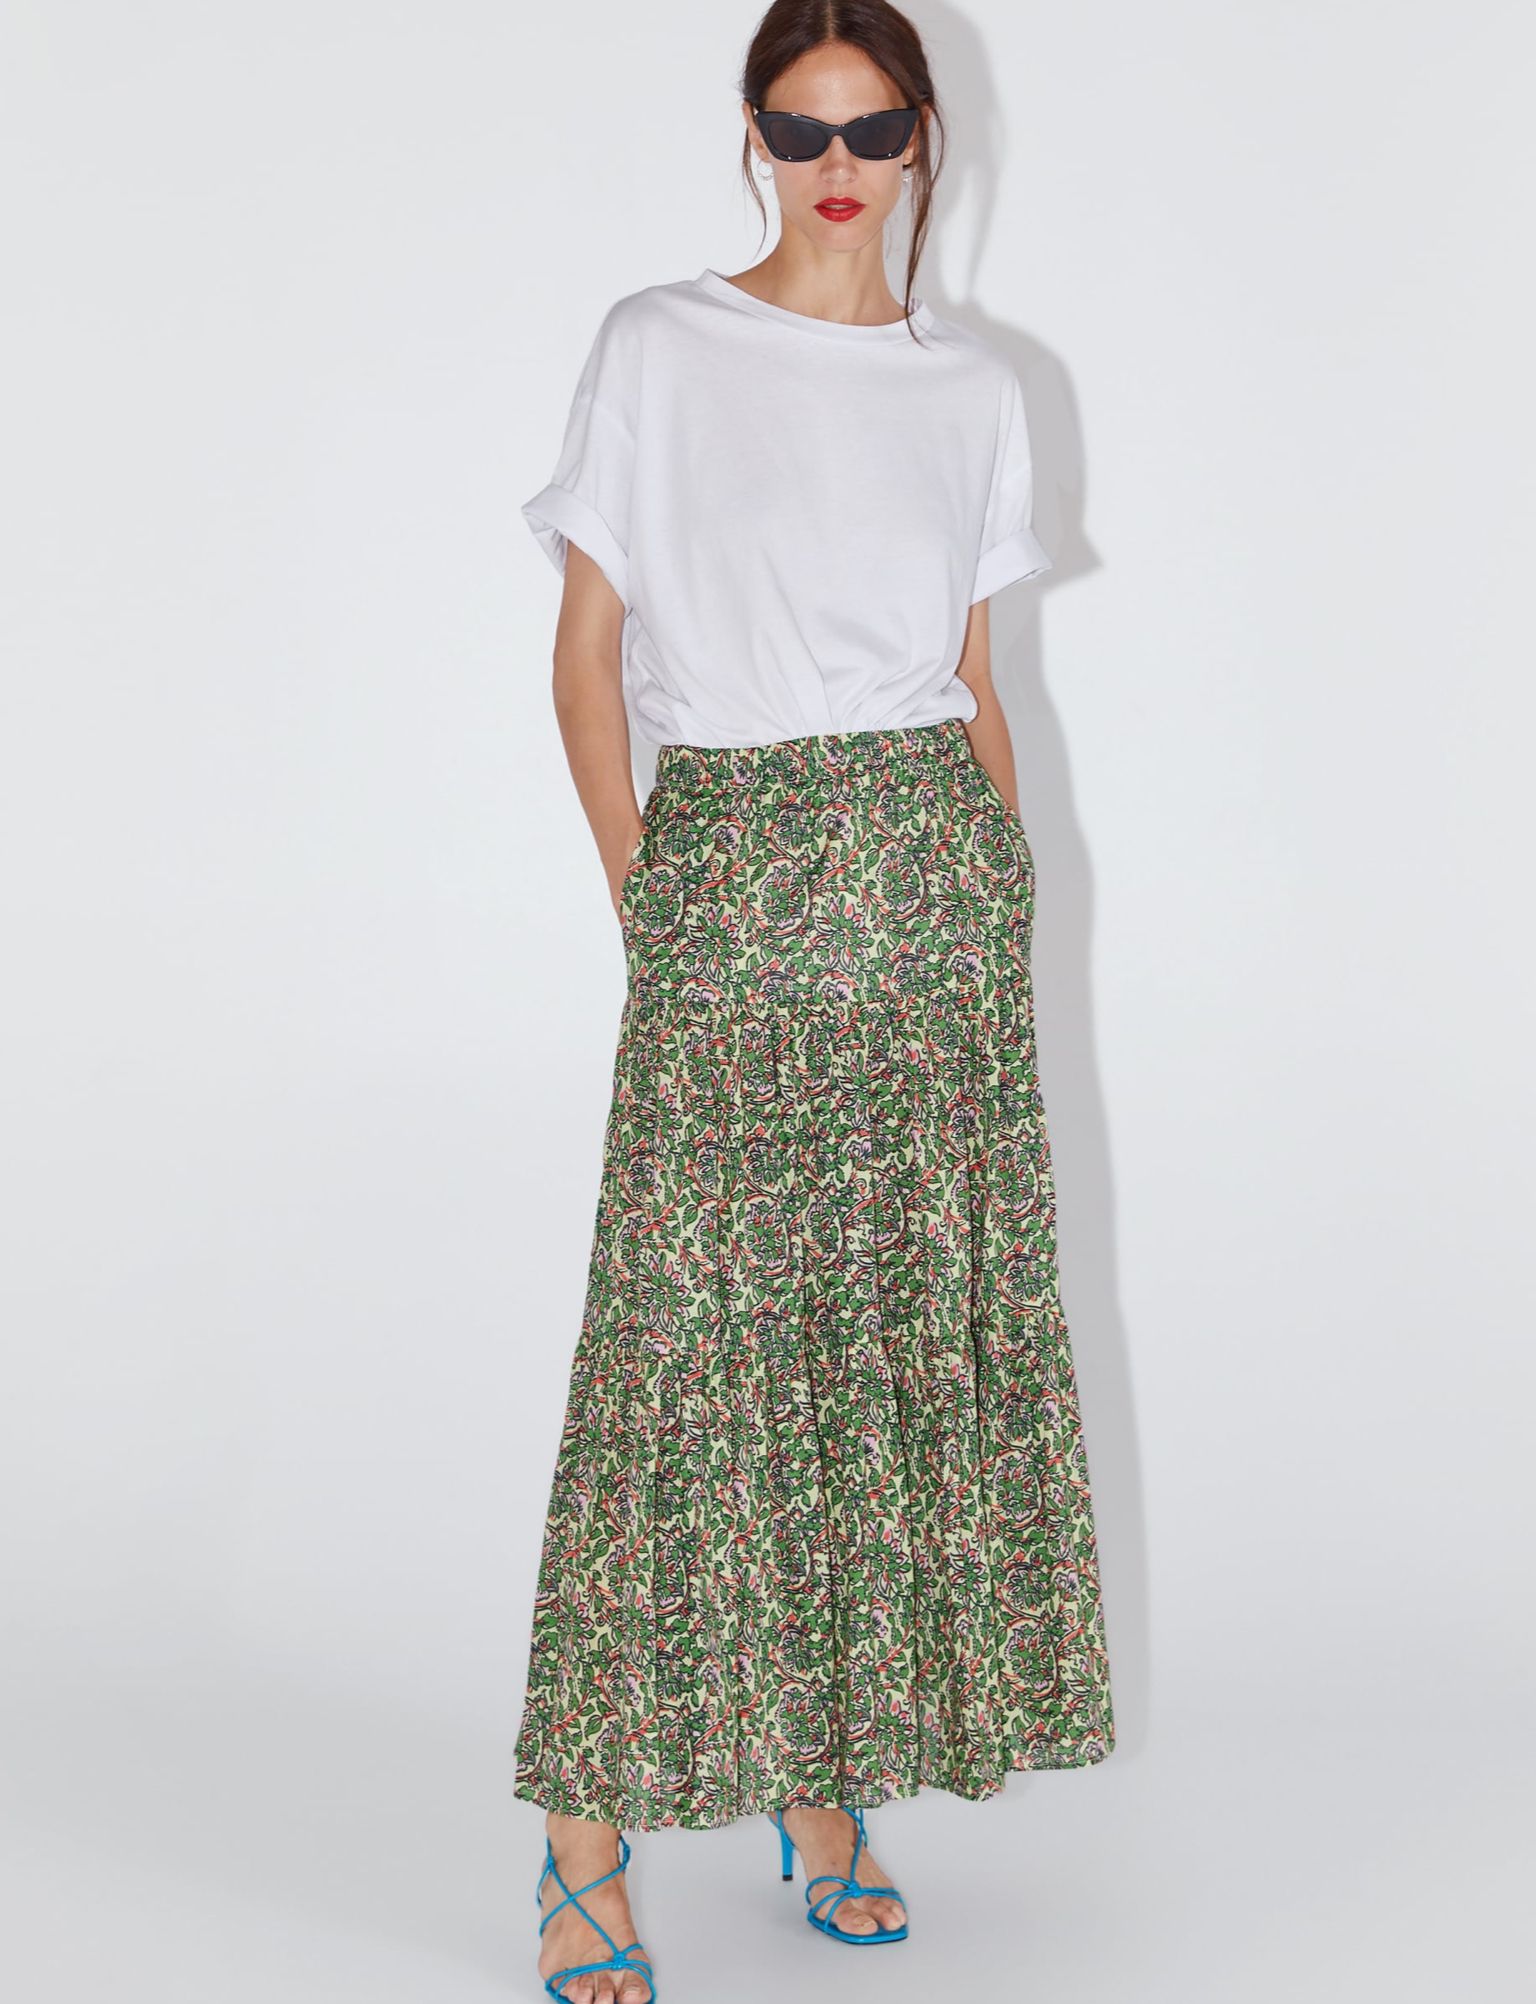 ZARA Maxi Skirts: Effortless Elegance Meets Contemporary Style